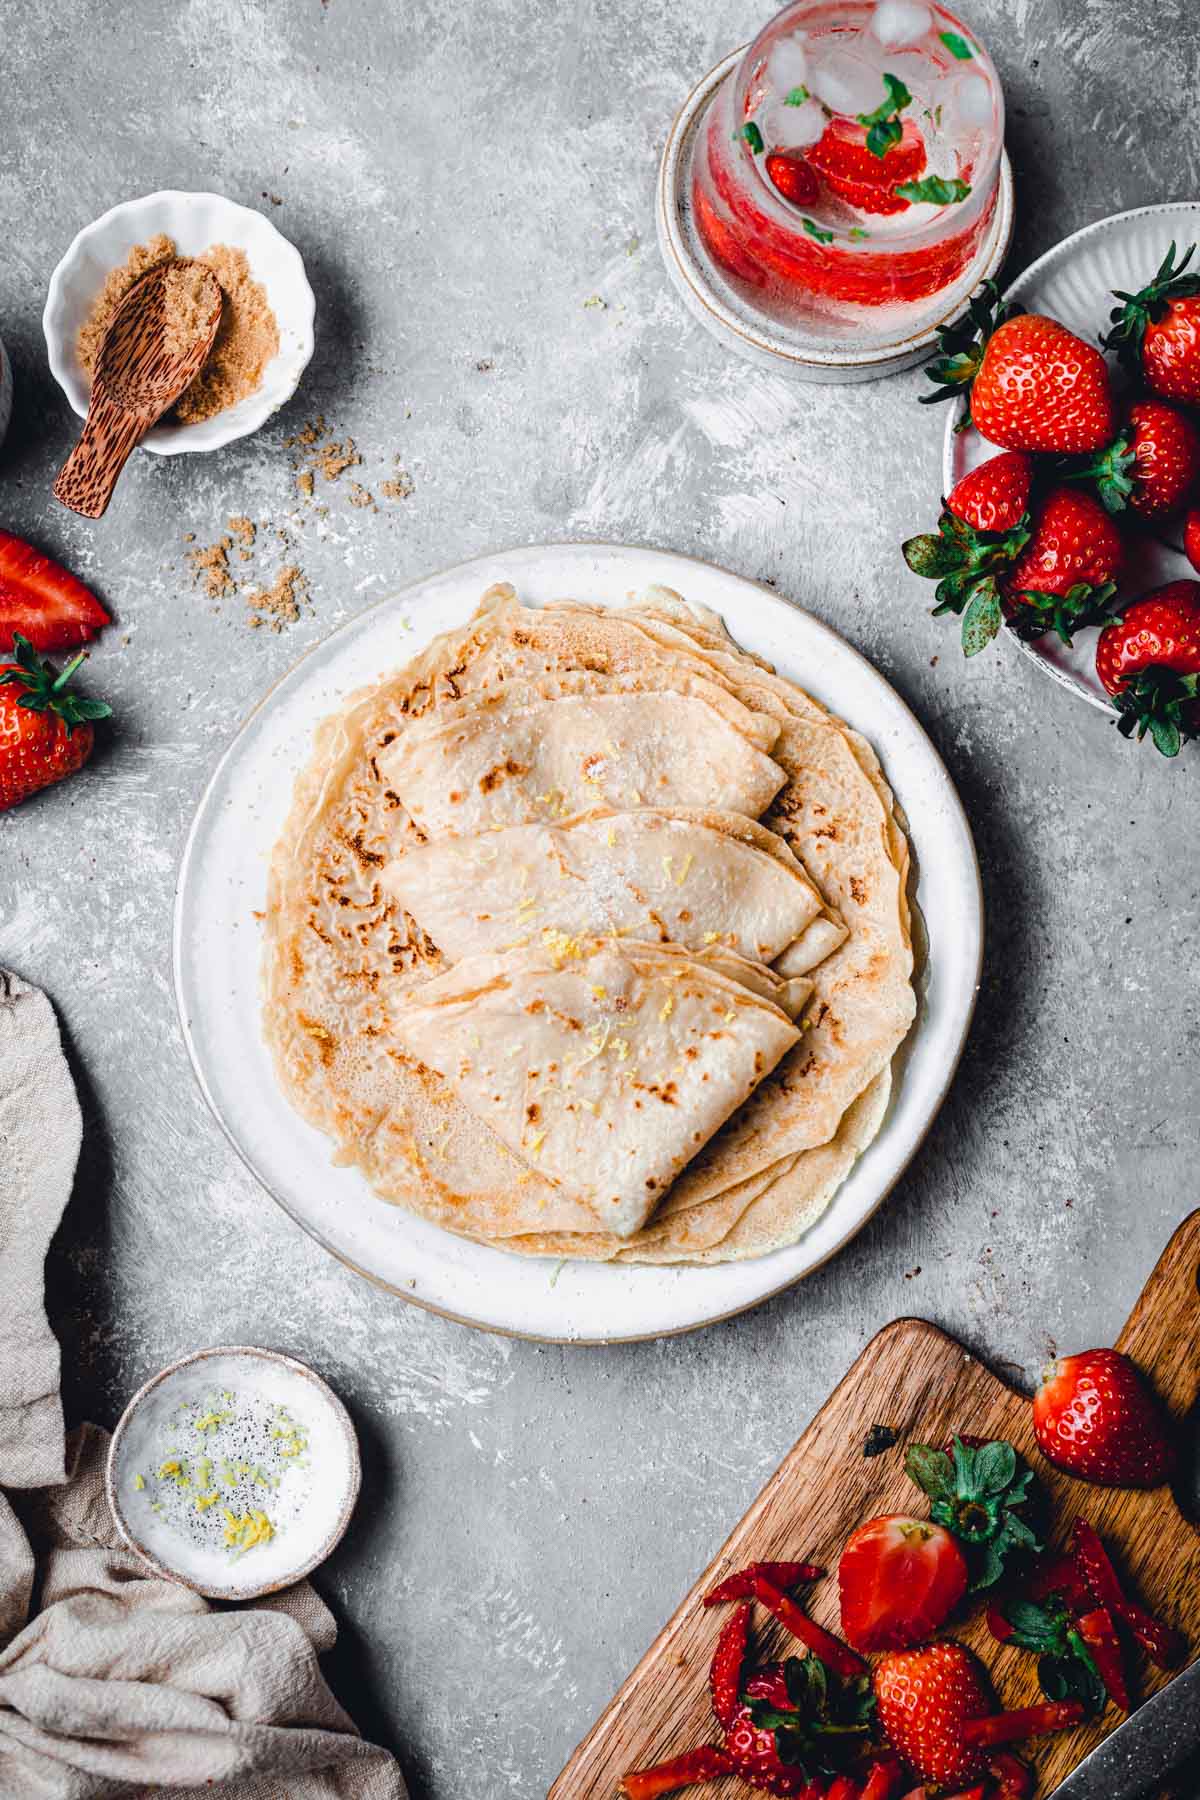 Several vegan crepes folded into a triangle and placed on a round plate.